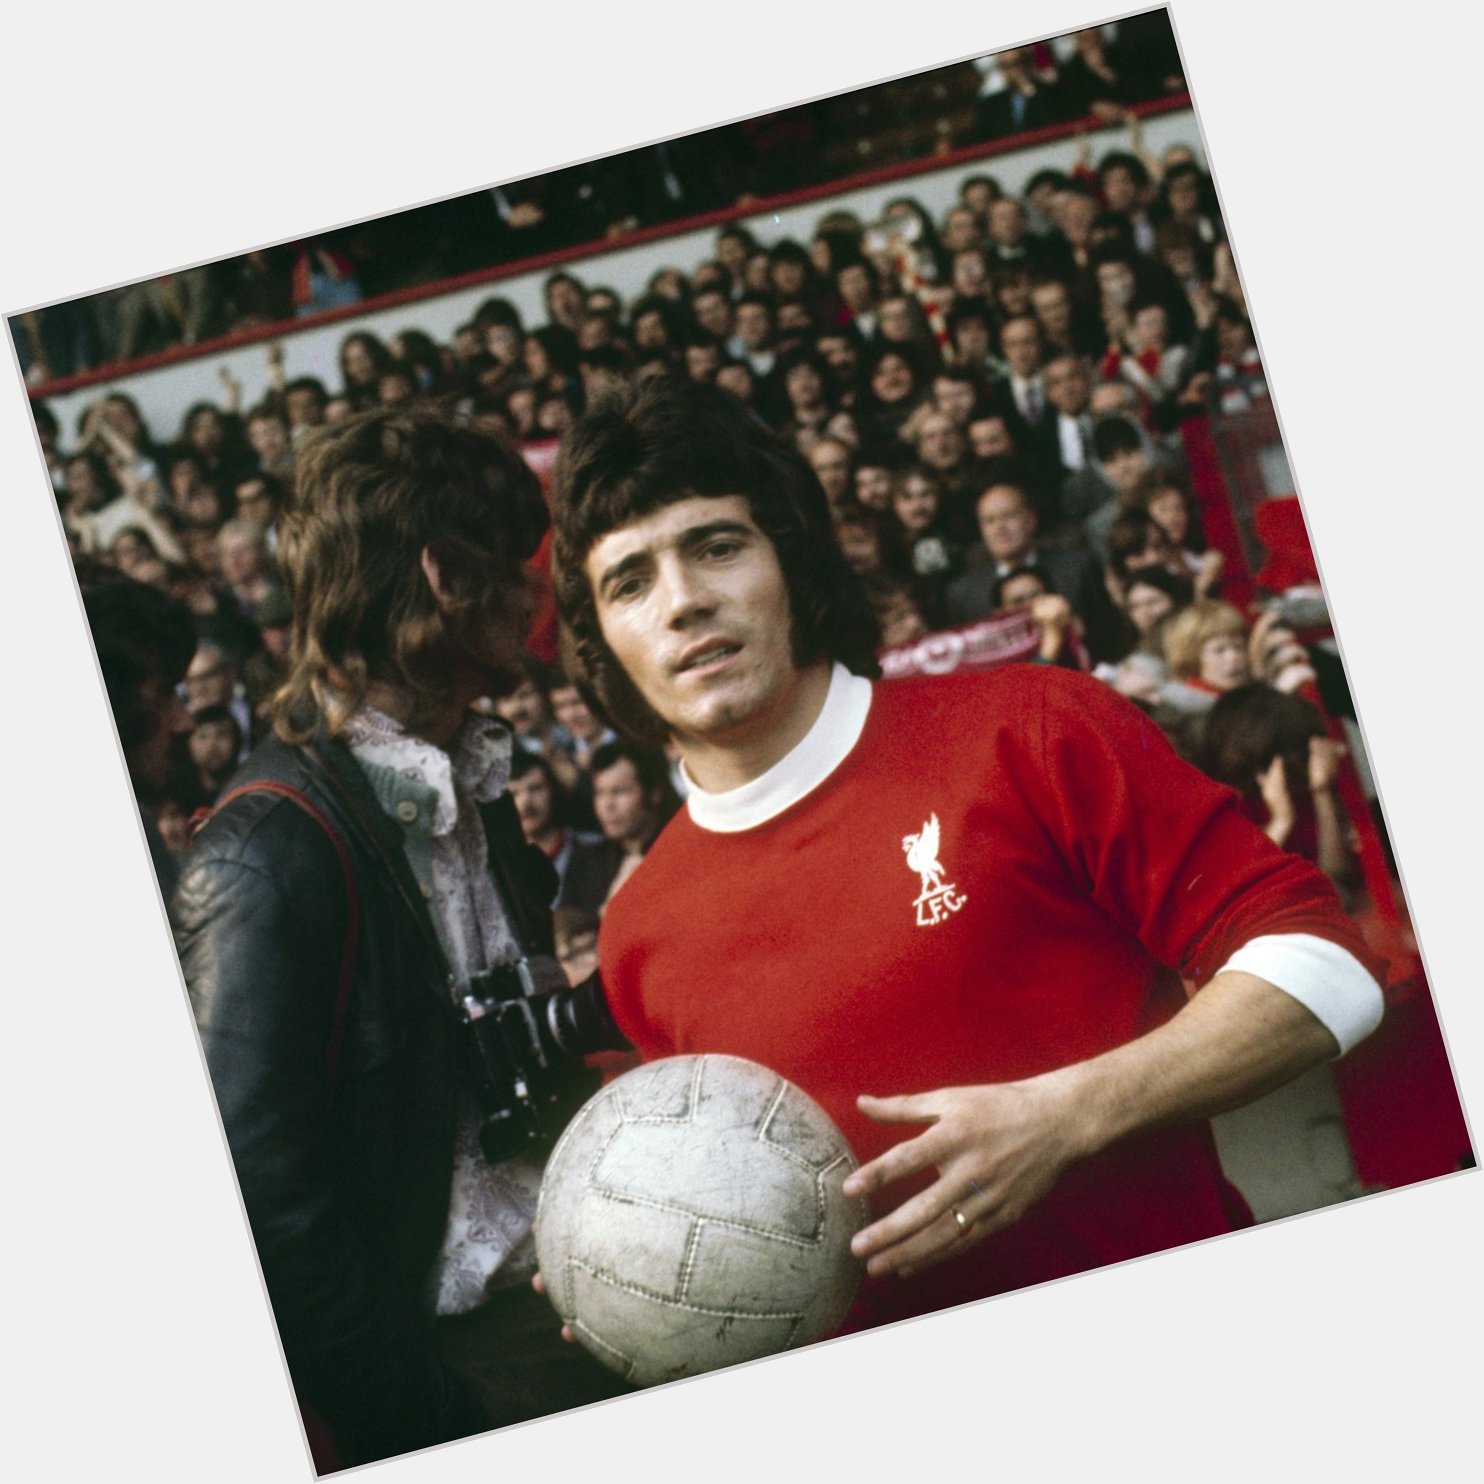 One of the finest players to put on an shirt. Happy 67th birthday, Kevin Keegan.   by 